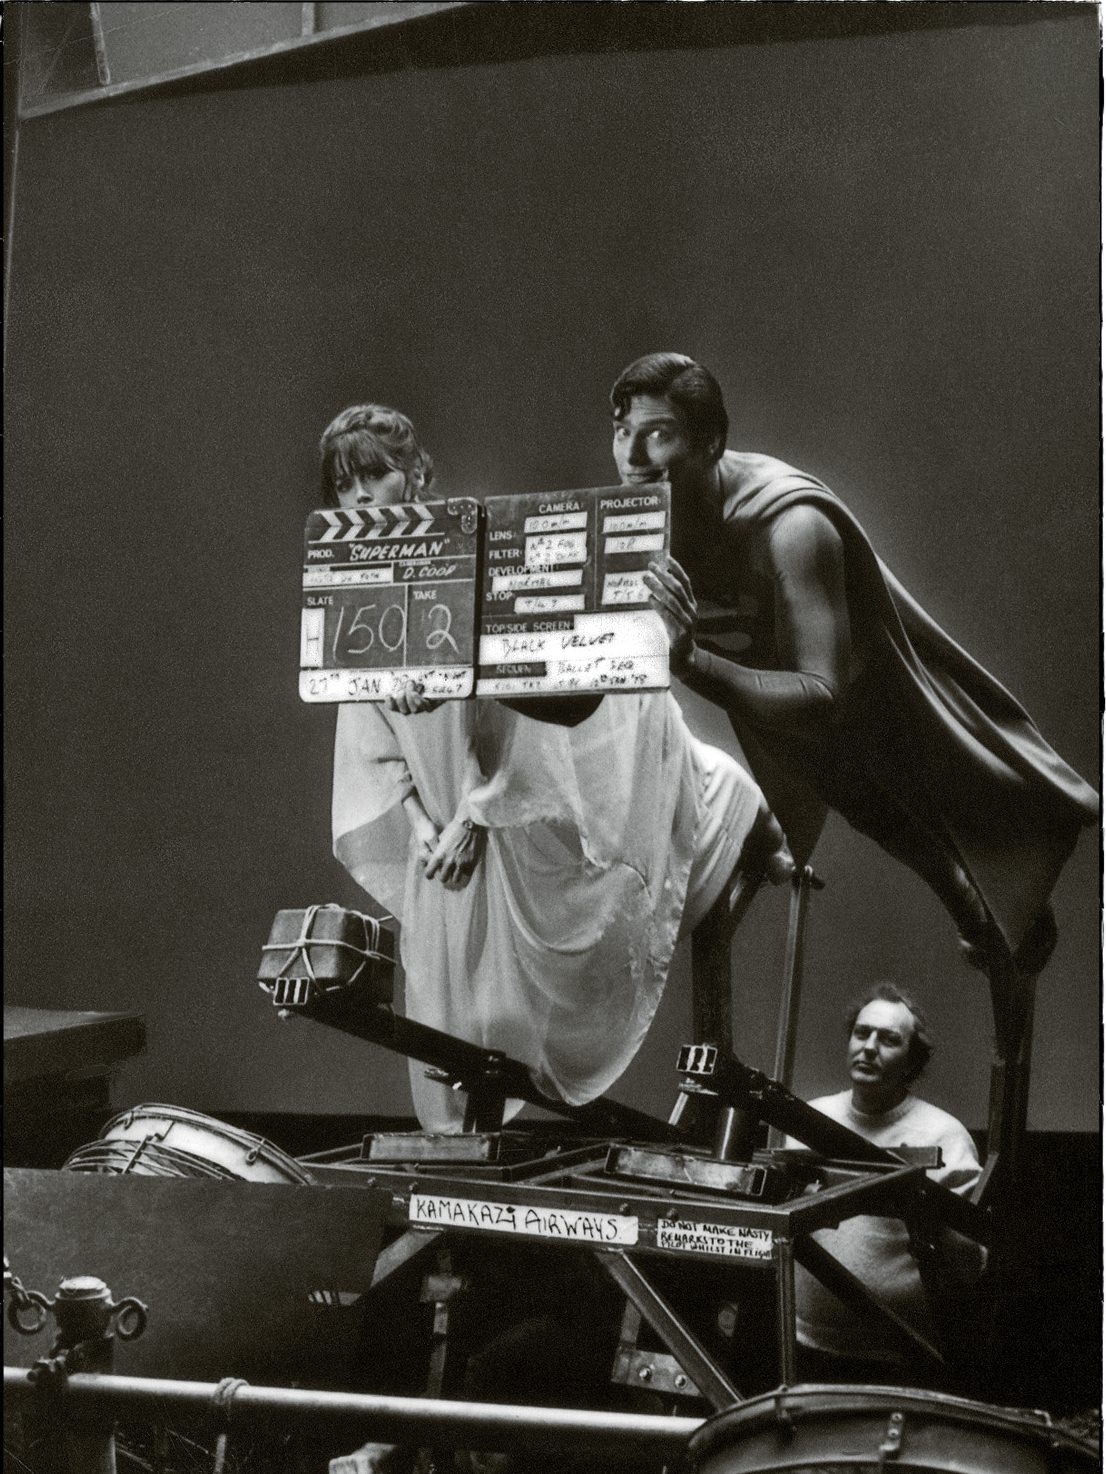 Christopher Reeve and Margot Kidder filming the first Superman movie, 1978